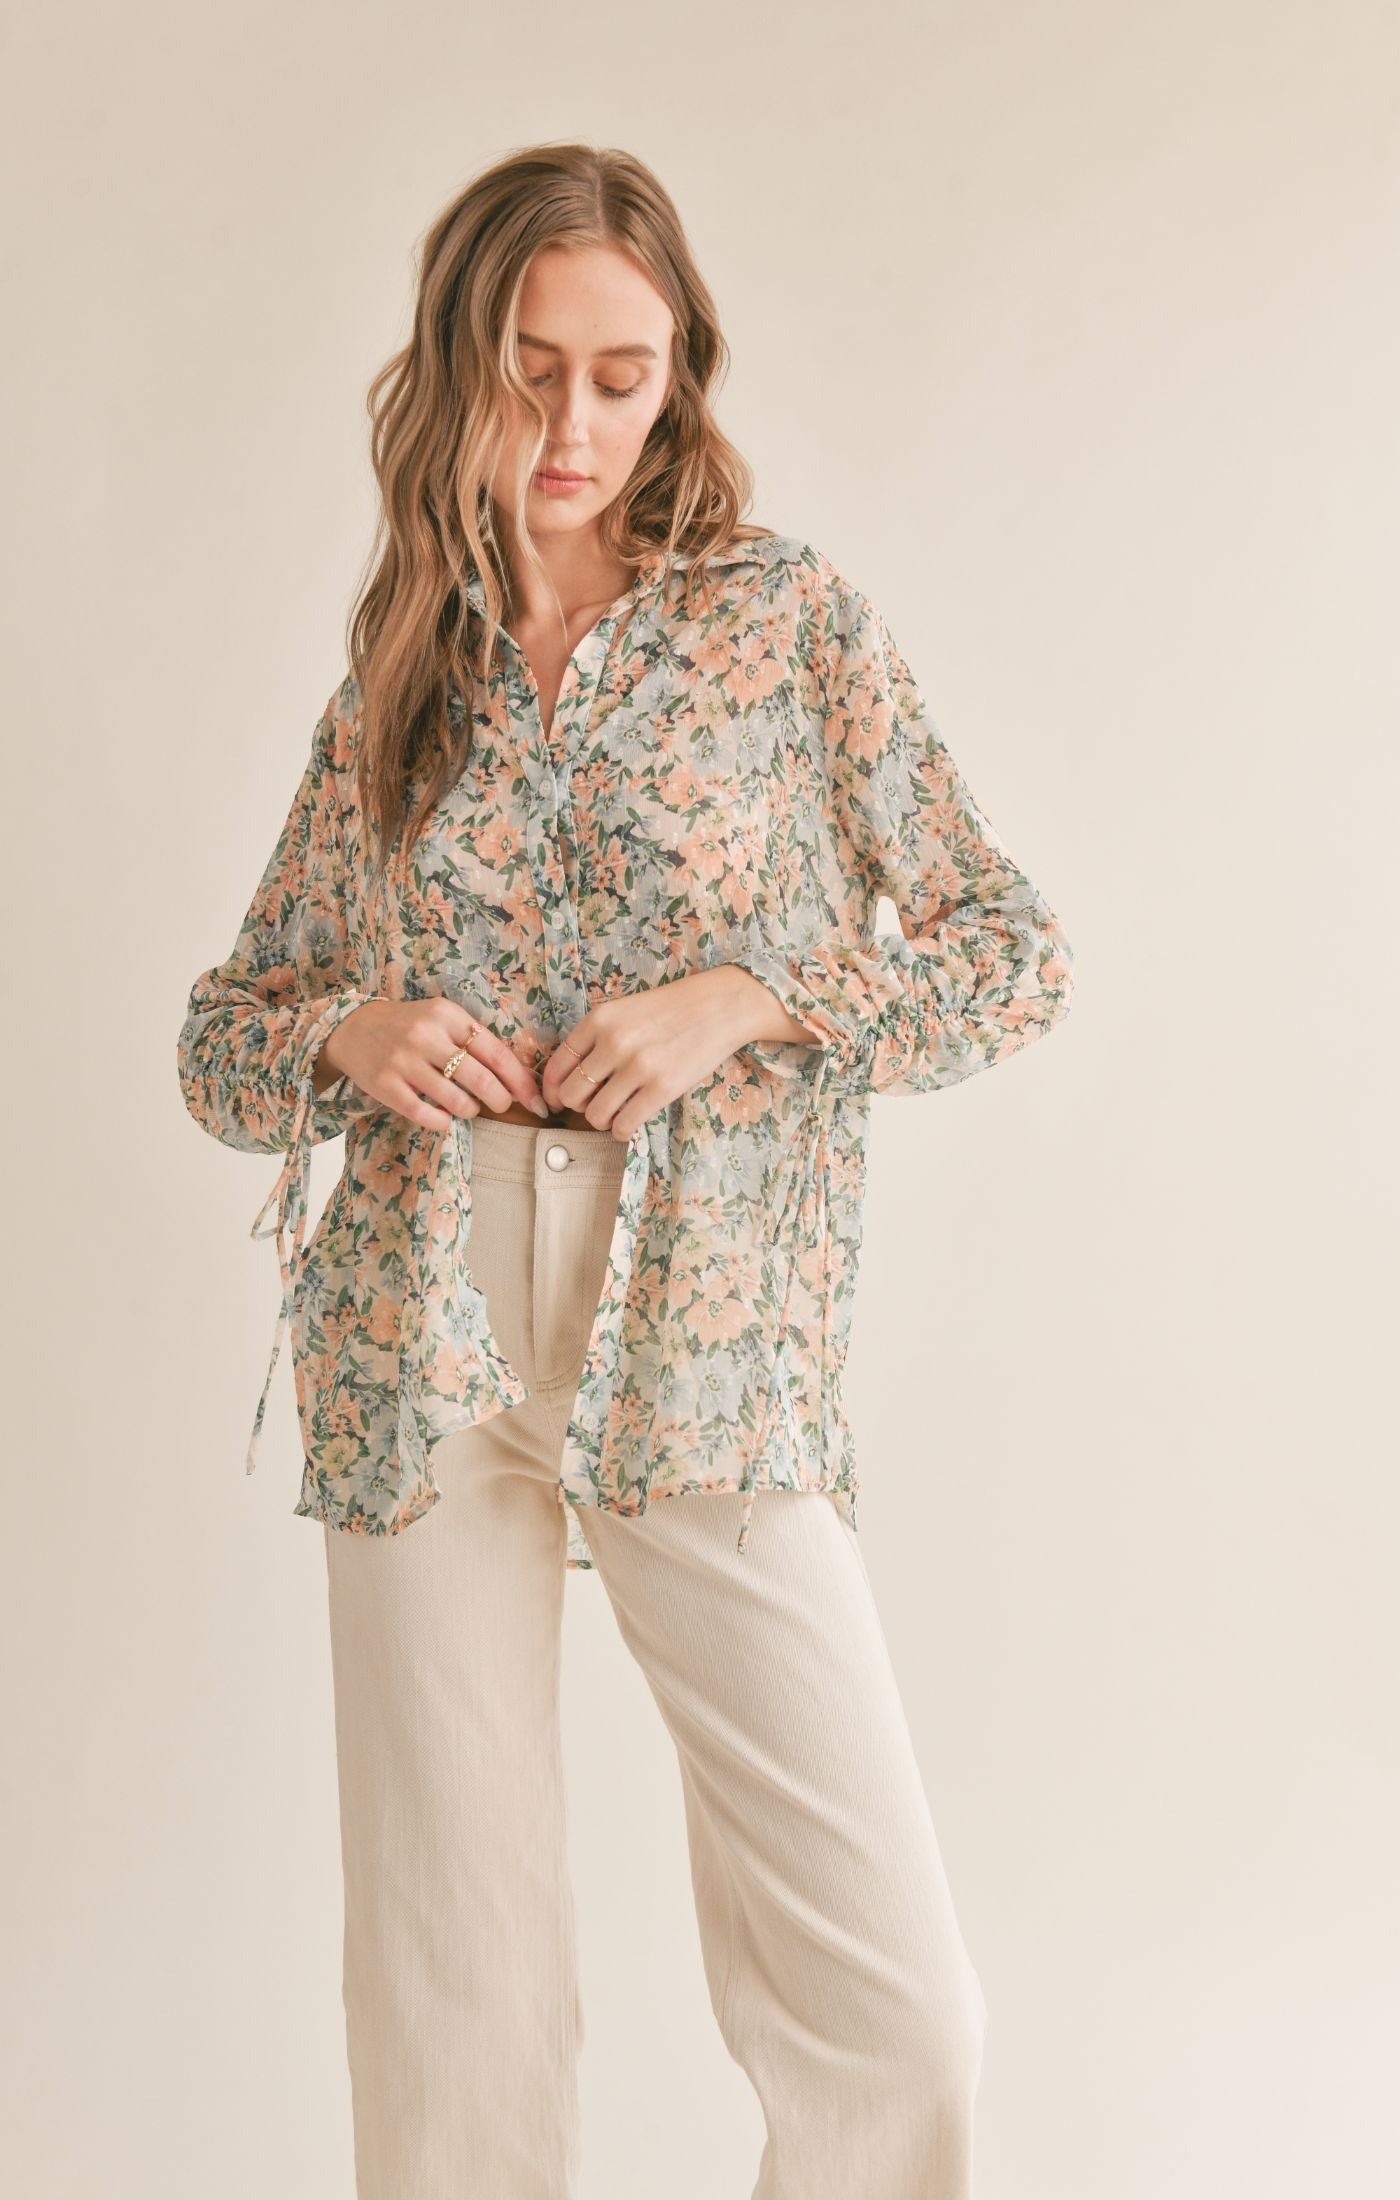 Green Thumbs Blouse